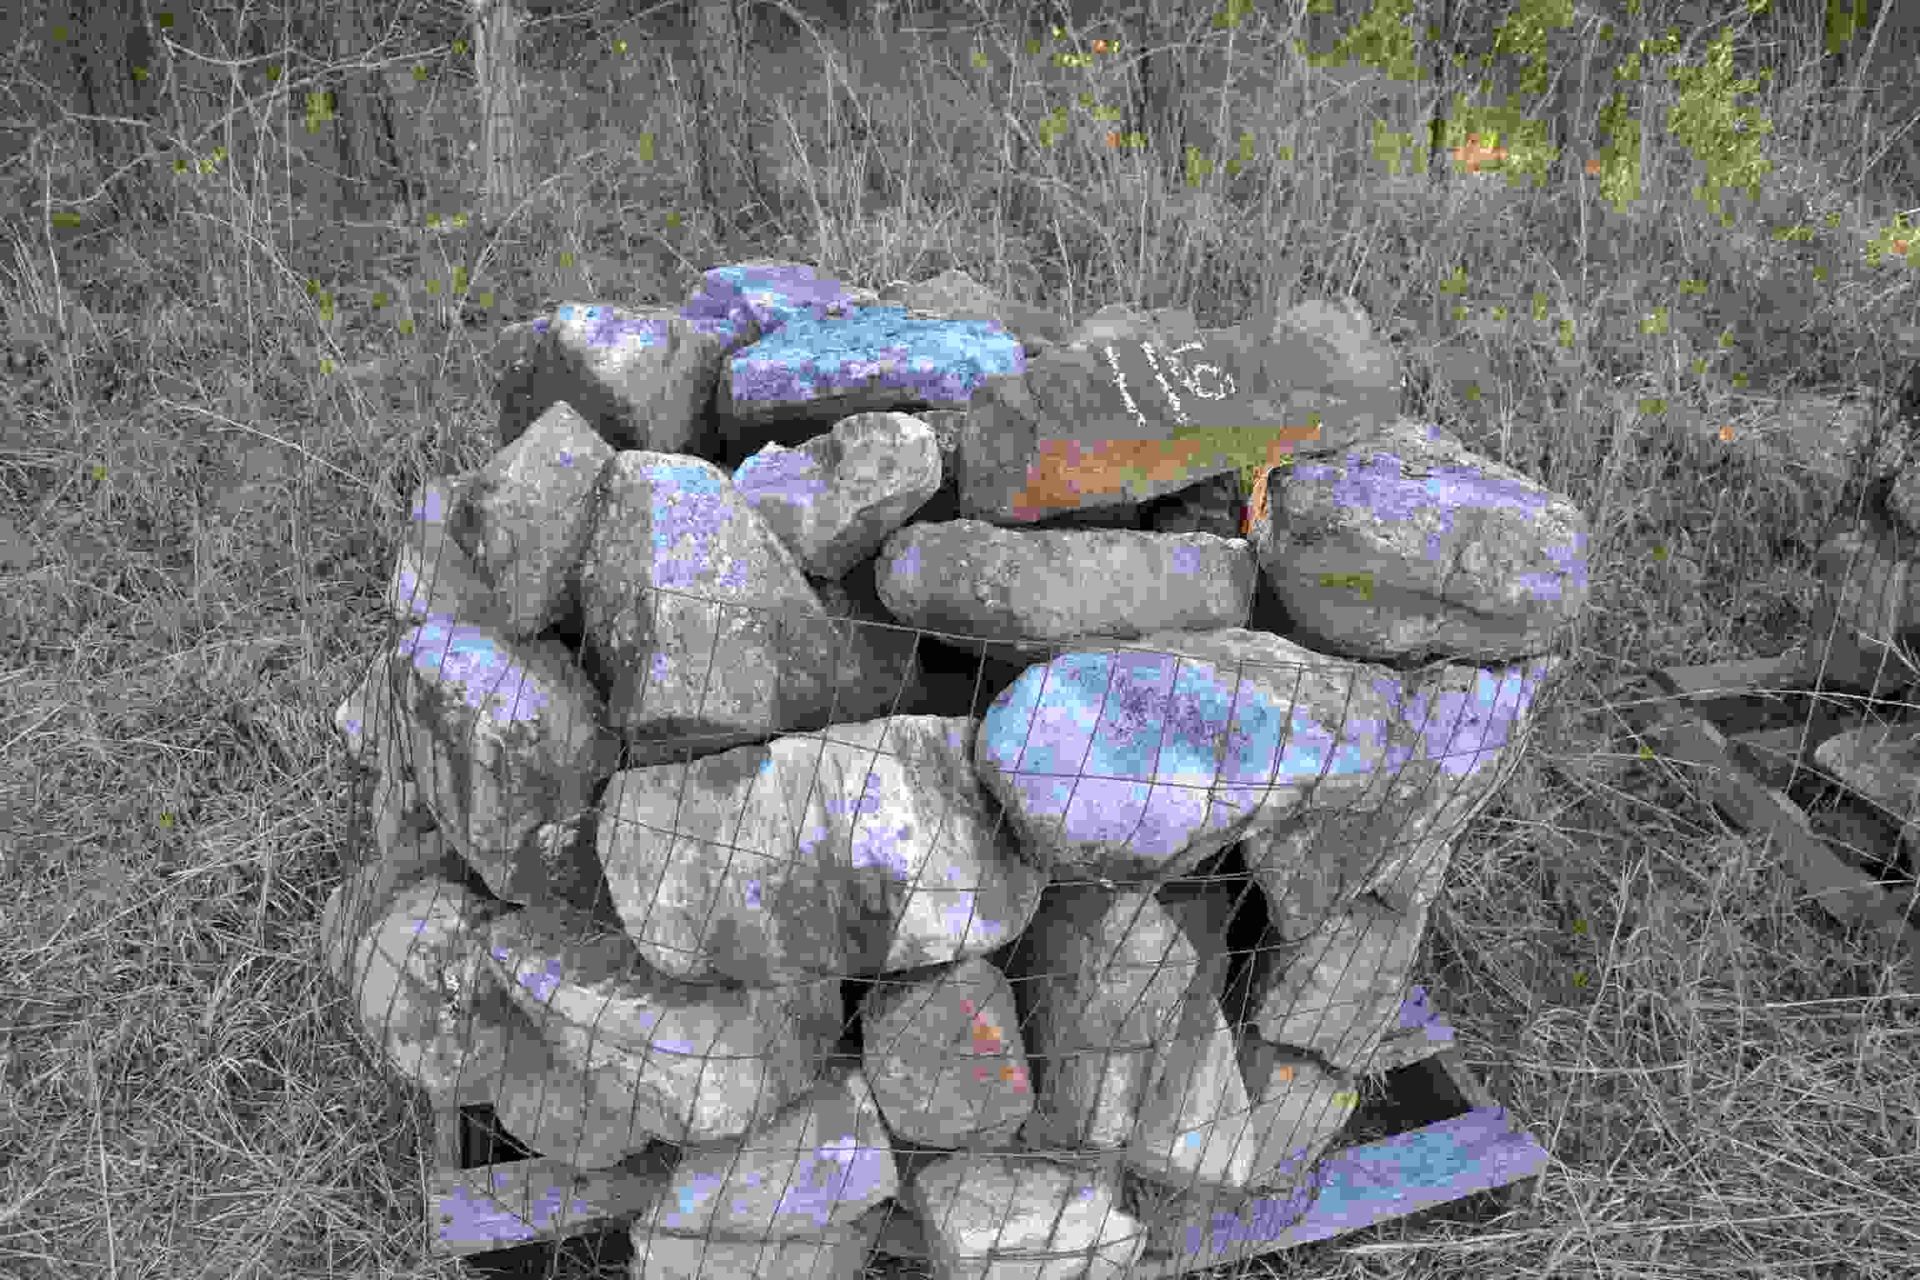 (20) PALLETS OF FIELD STONE LOCATED SITE 1